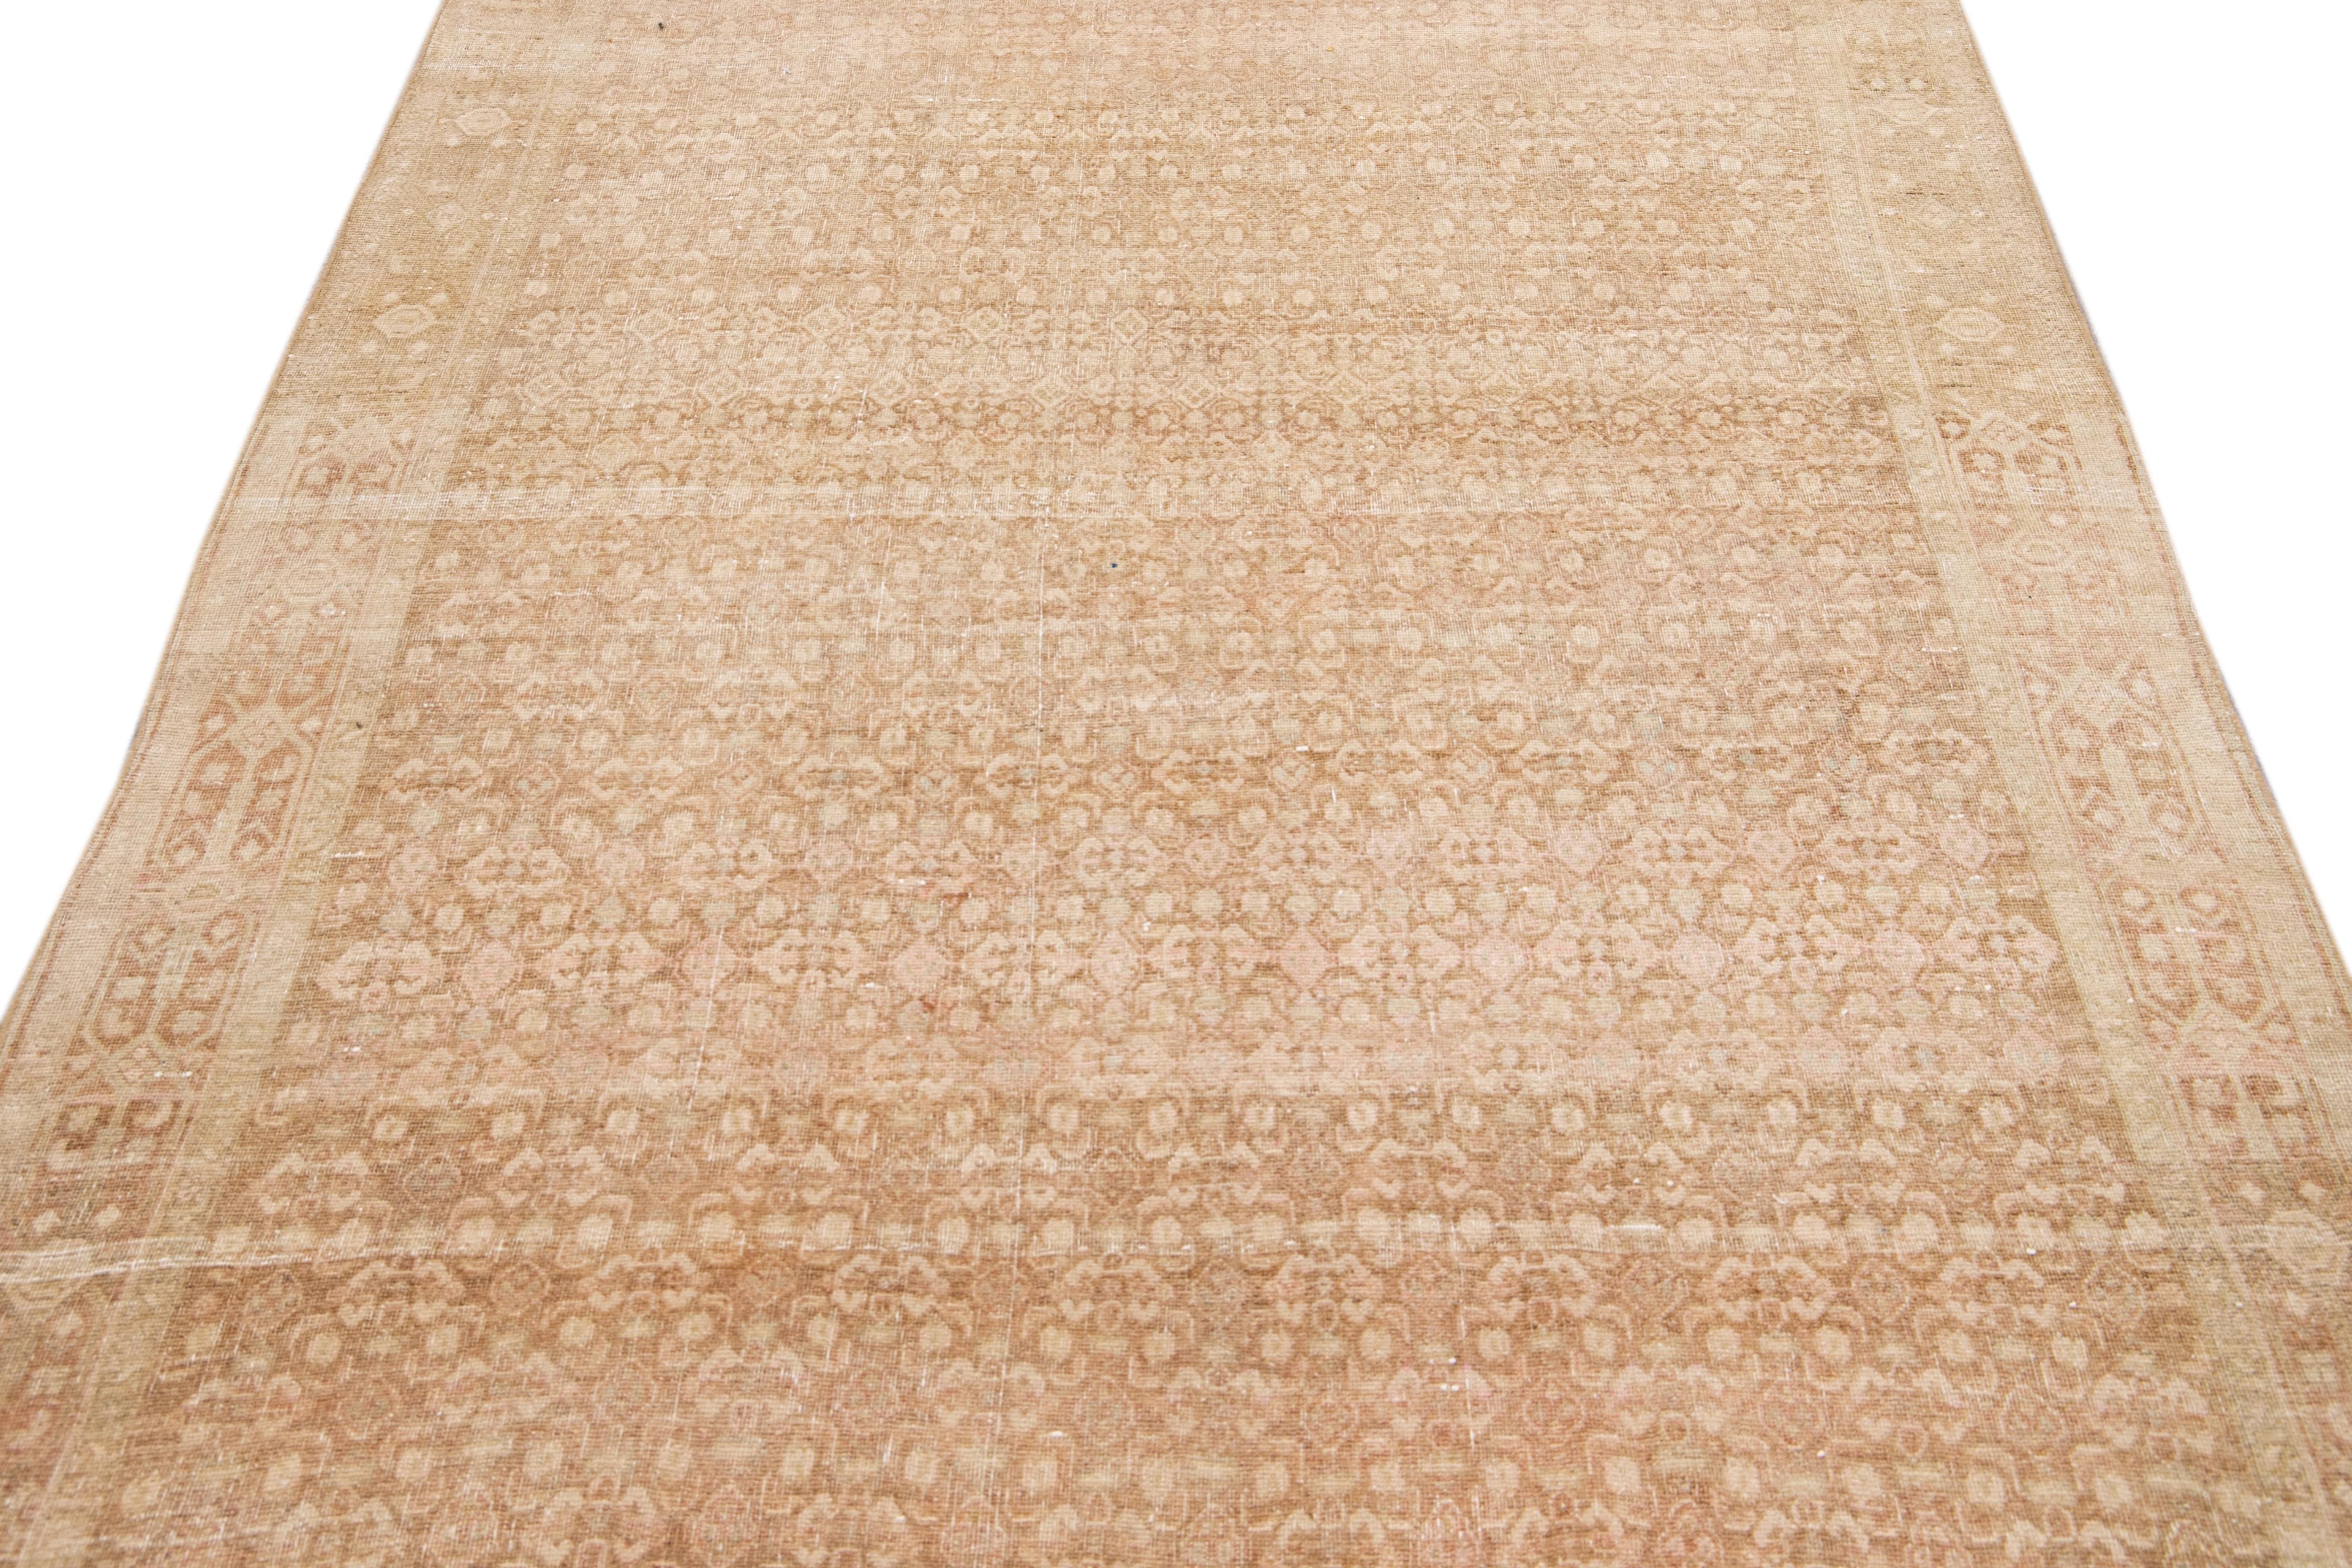 Islamic Antique Malayer Handmade Allover Design Beige Wool Rug For Sale